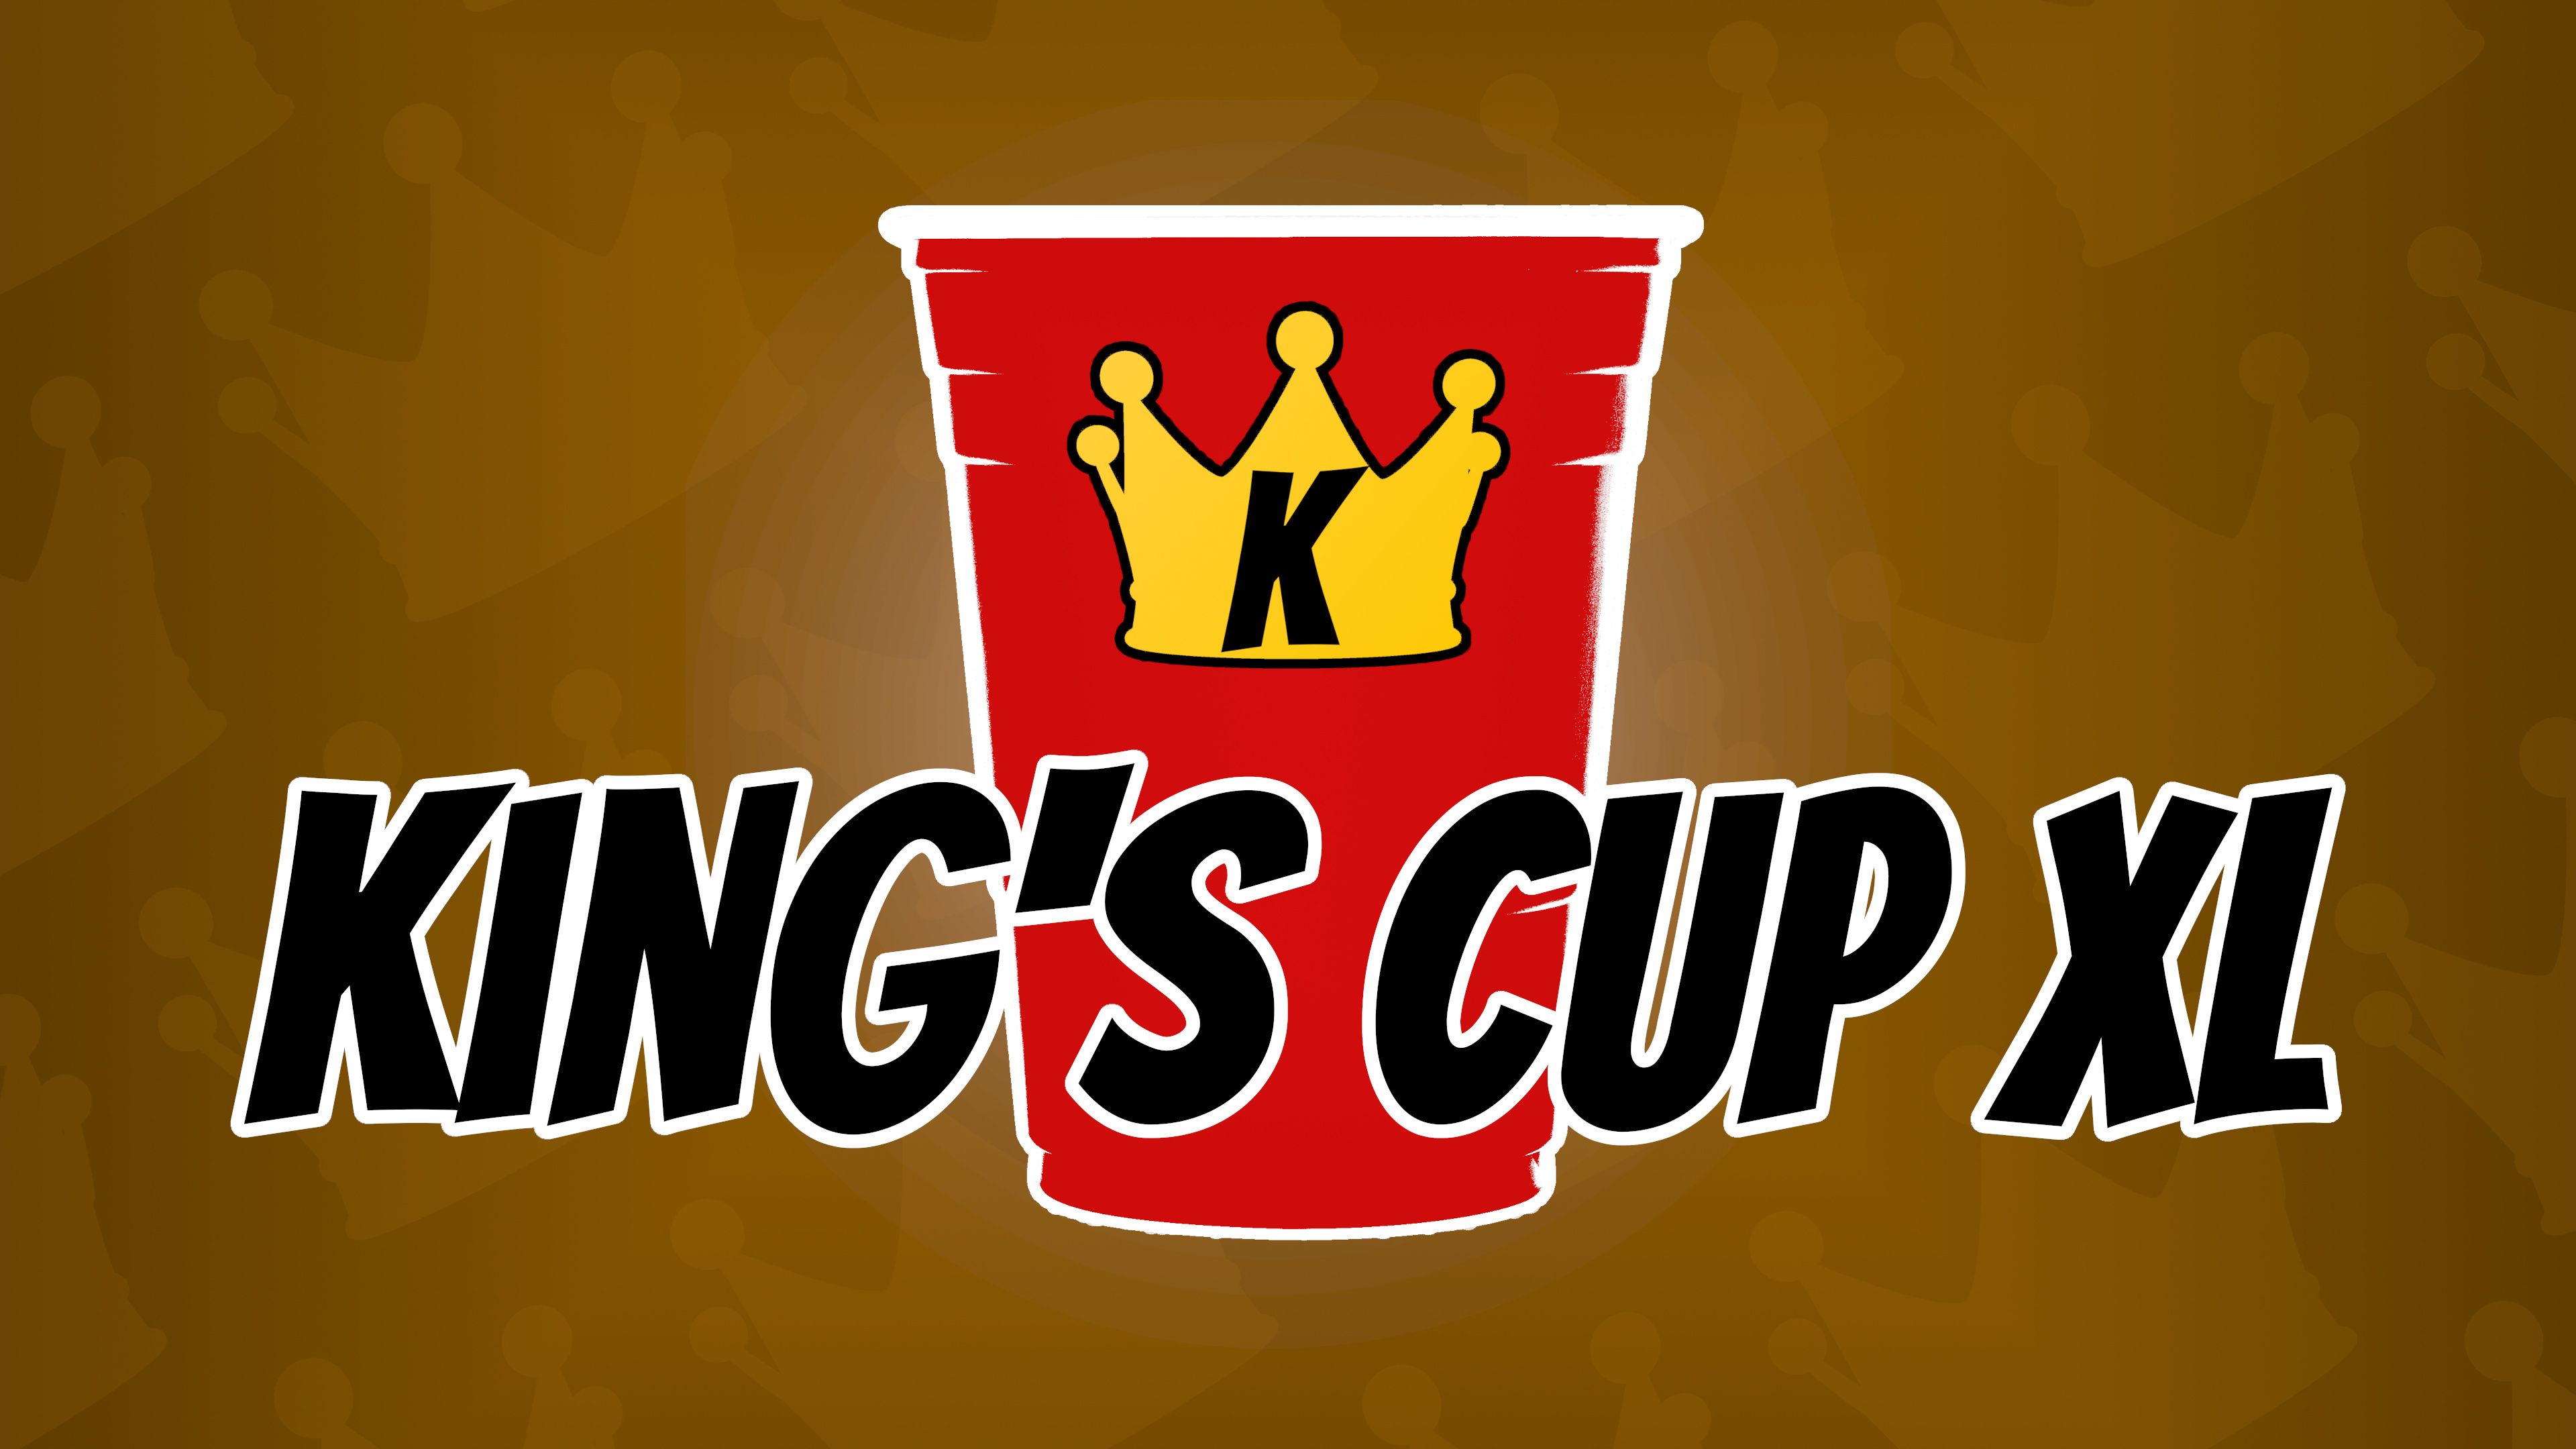 King's Cup XL